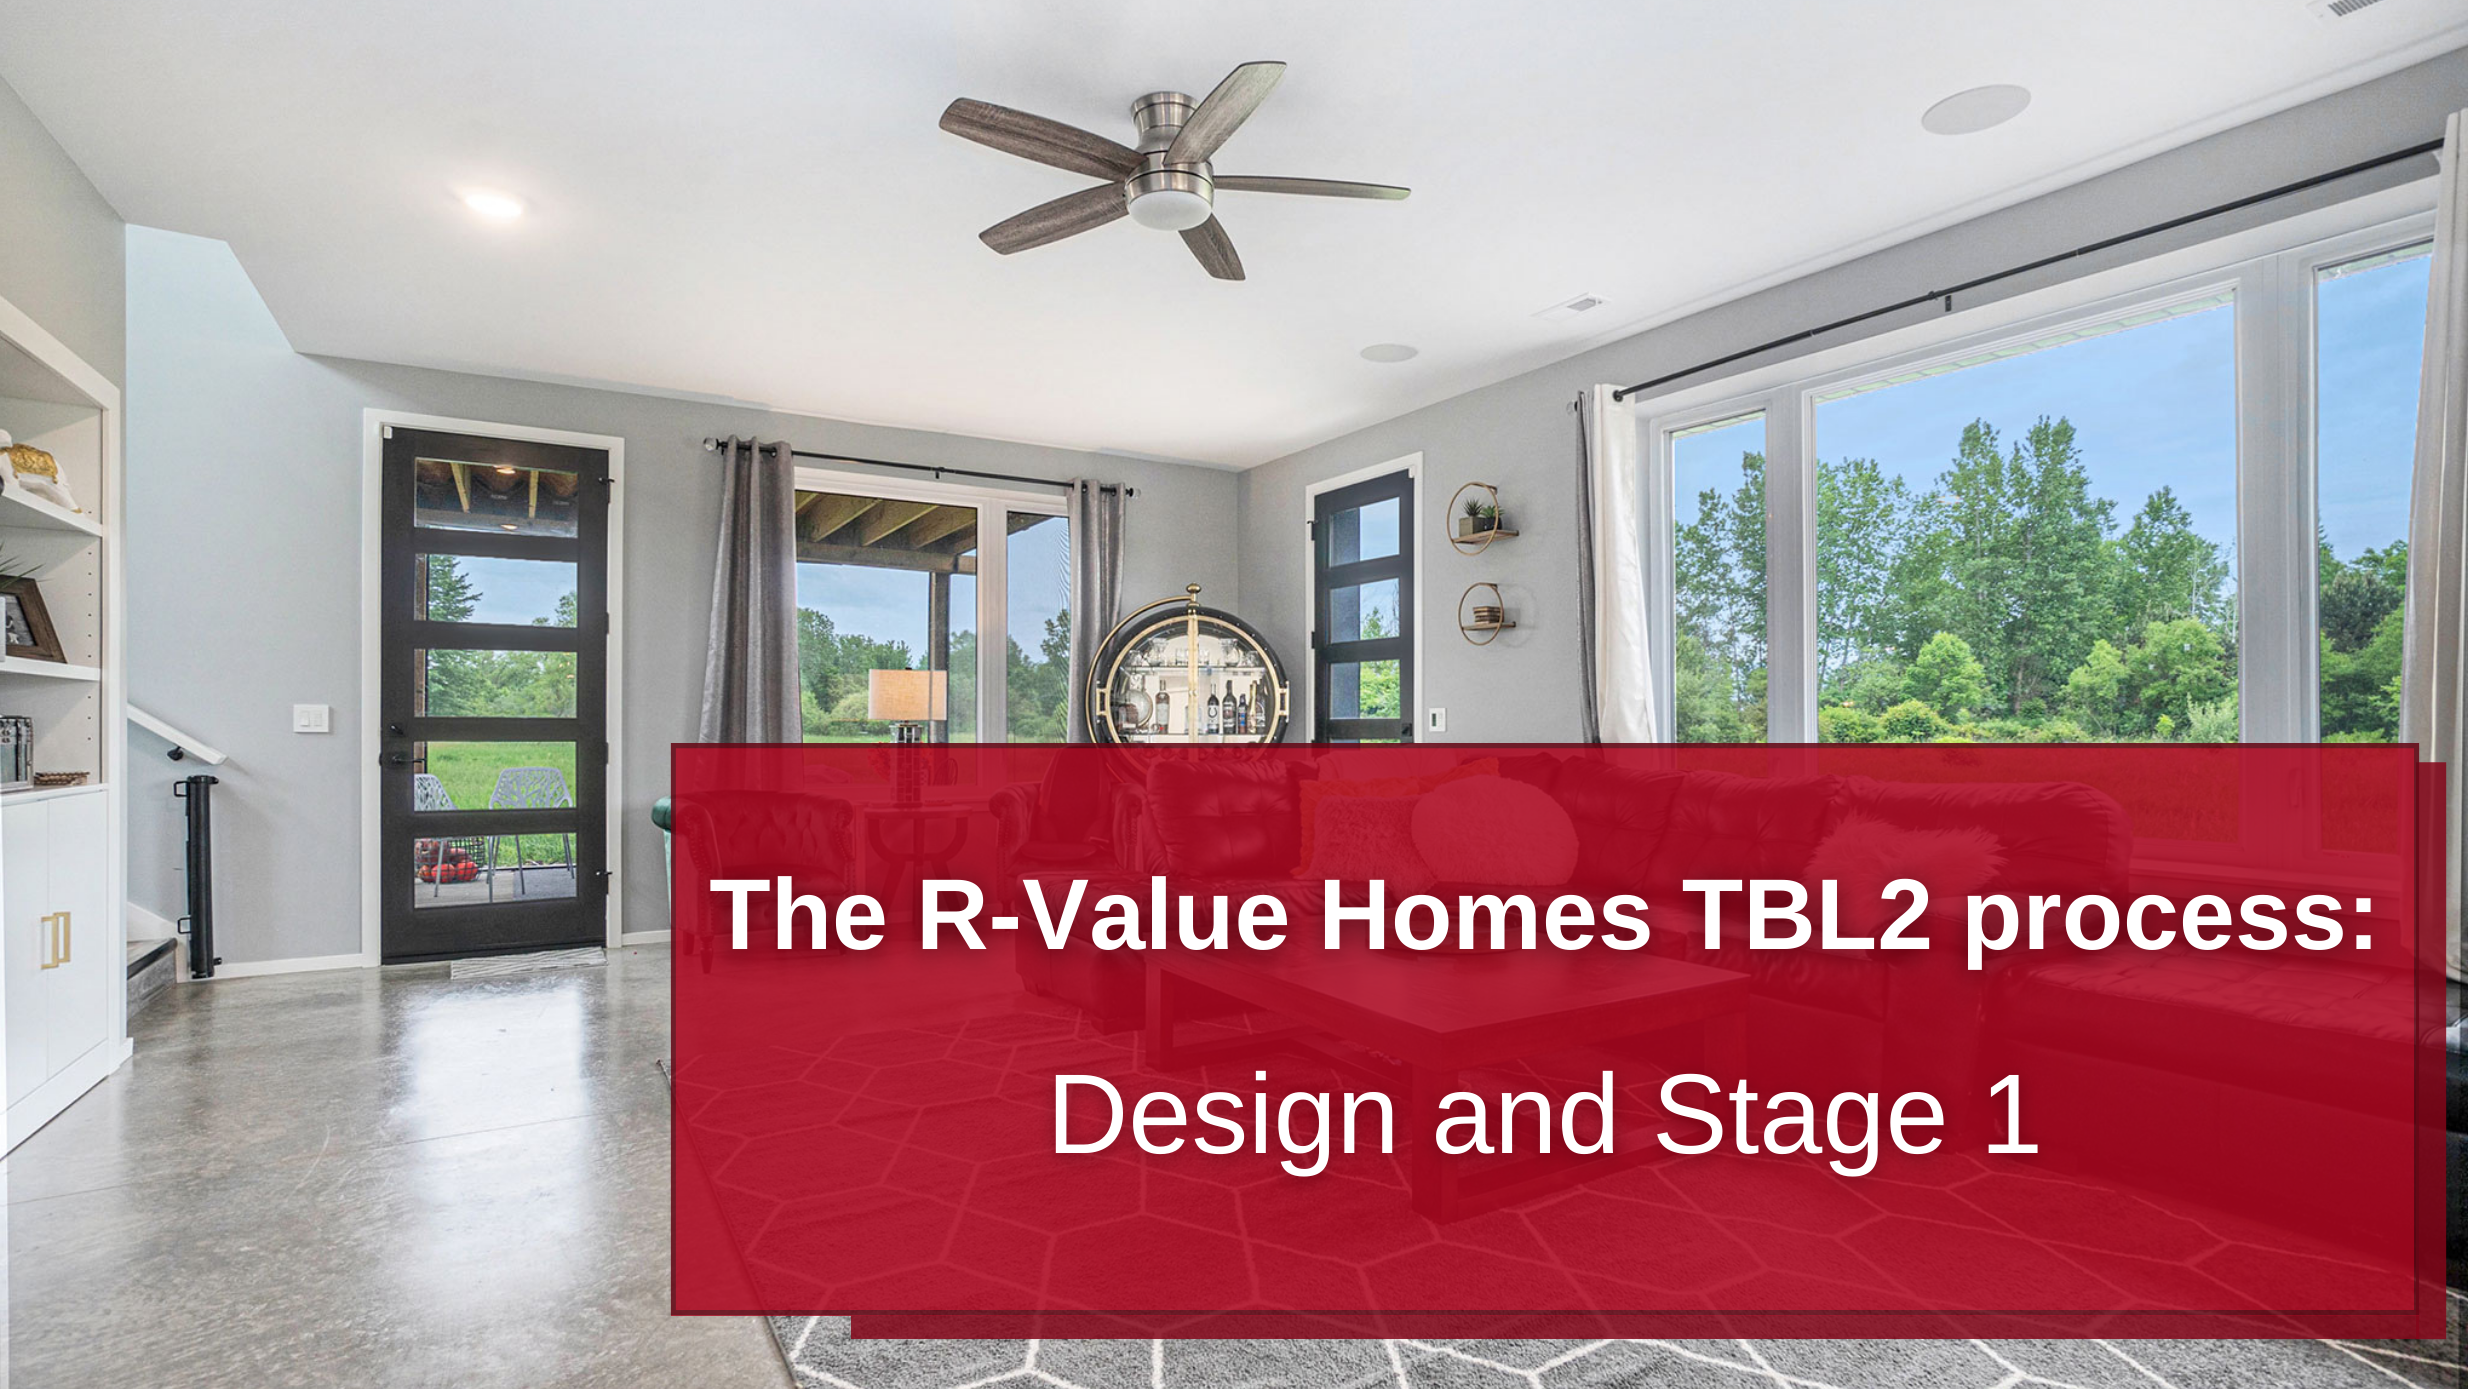 The R-Value Homes TBL2 process: Design and Stage 1